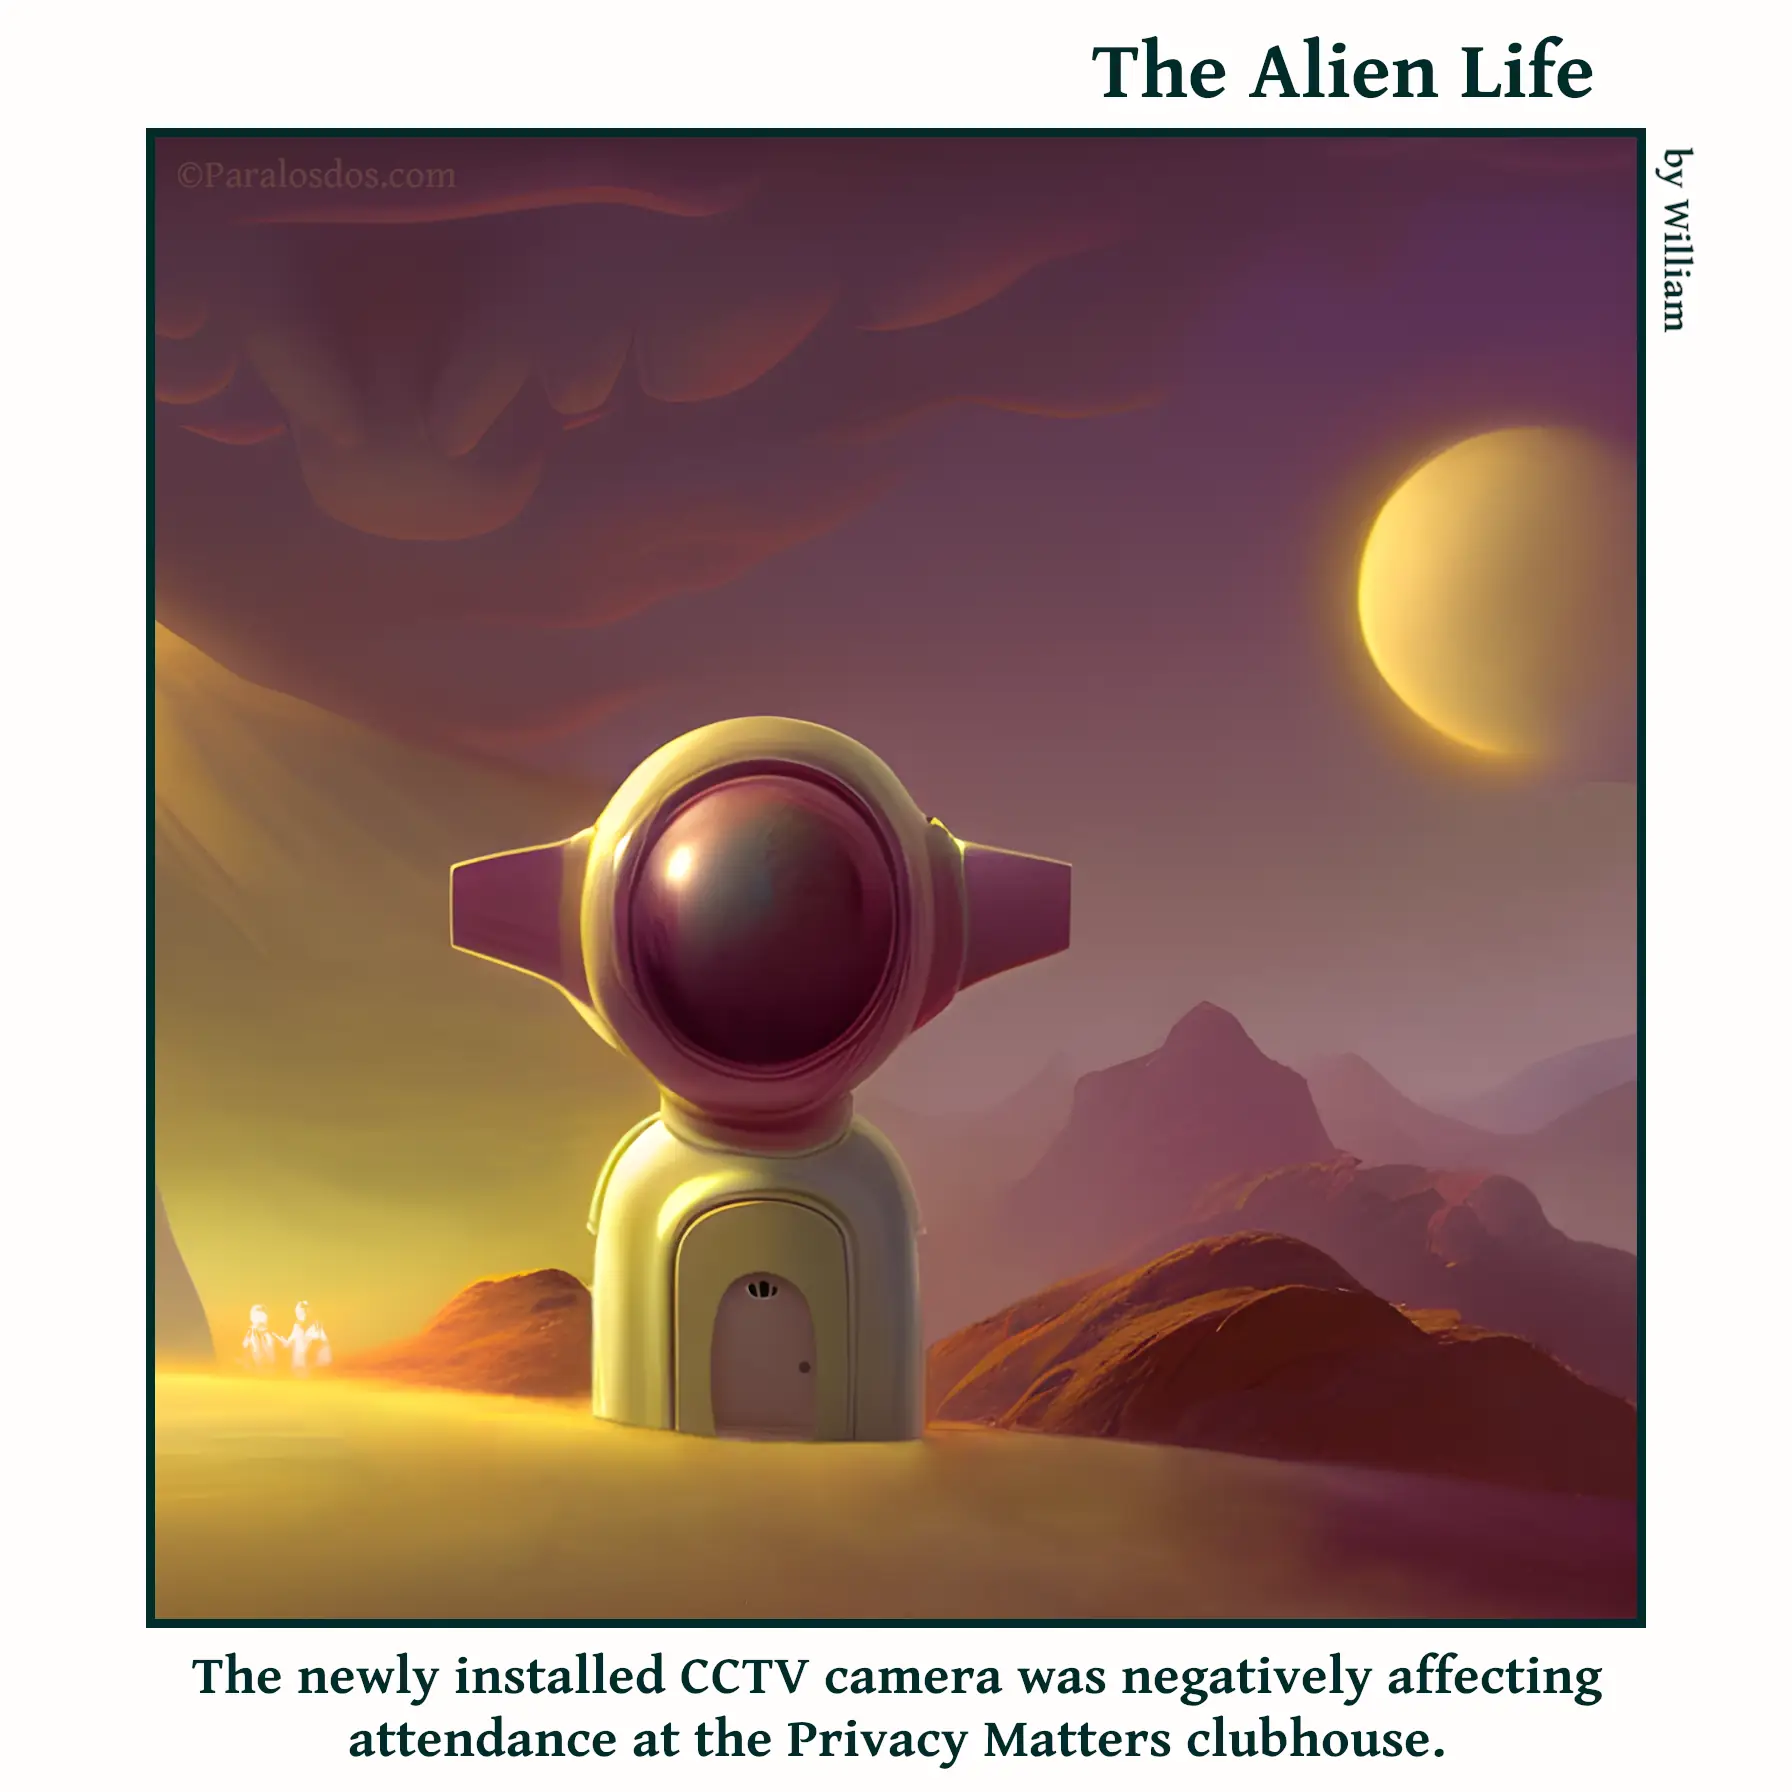 The Alien Life, one panel Comic. A building with one door in the front has a CCTV camera on the roof. The camera is bigger than the building. The caption reads: The newly installed CCTV camera was negatively affecting attendance at the Privacy Matters clubhouse.